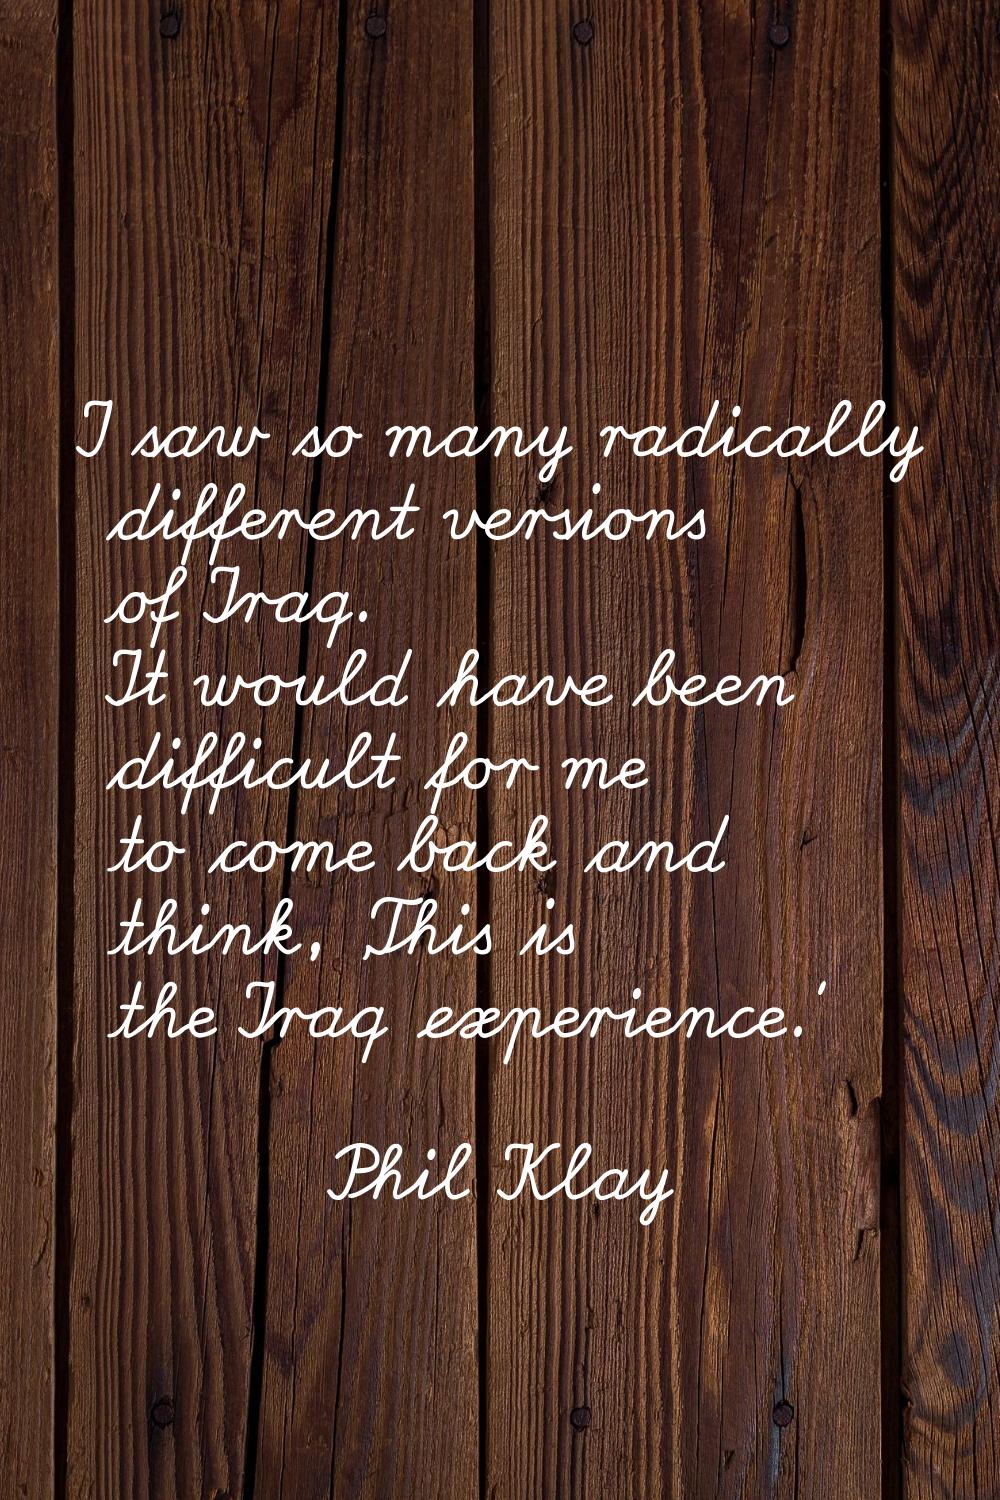 I saw so many radically different versions of Iraq. It would have been difficult for me to come bac